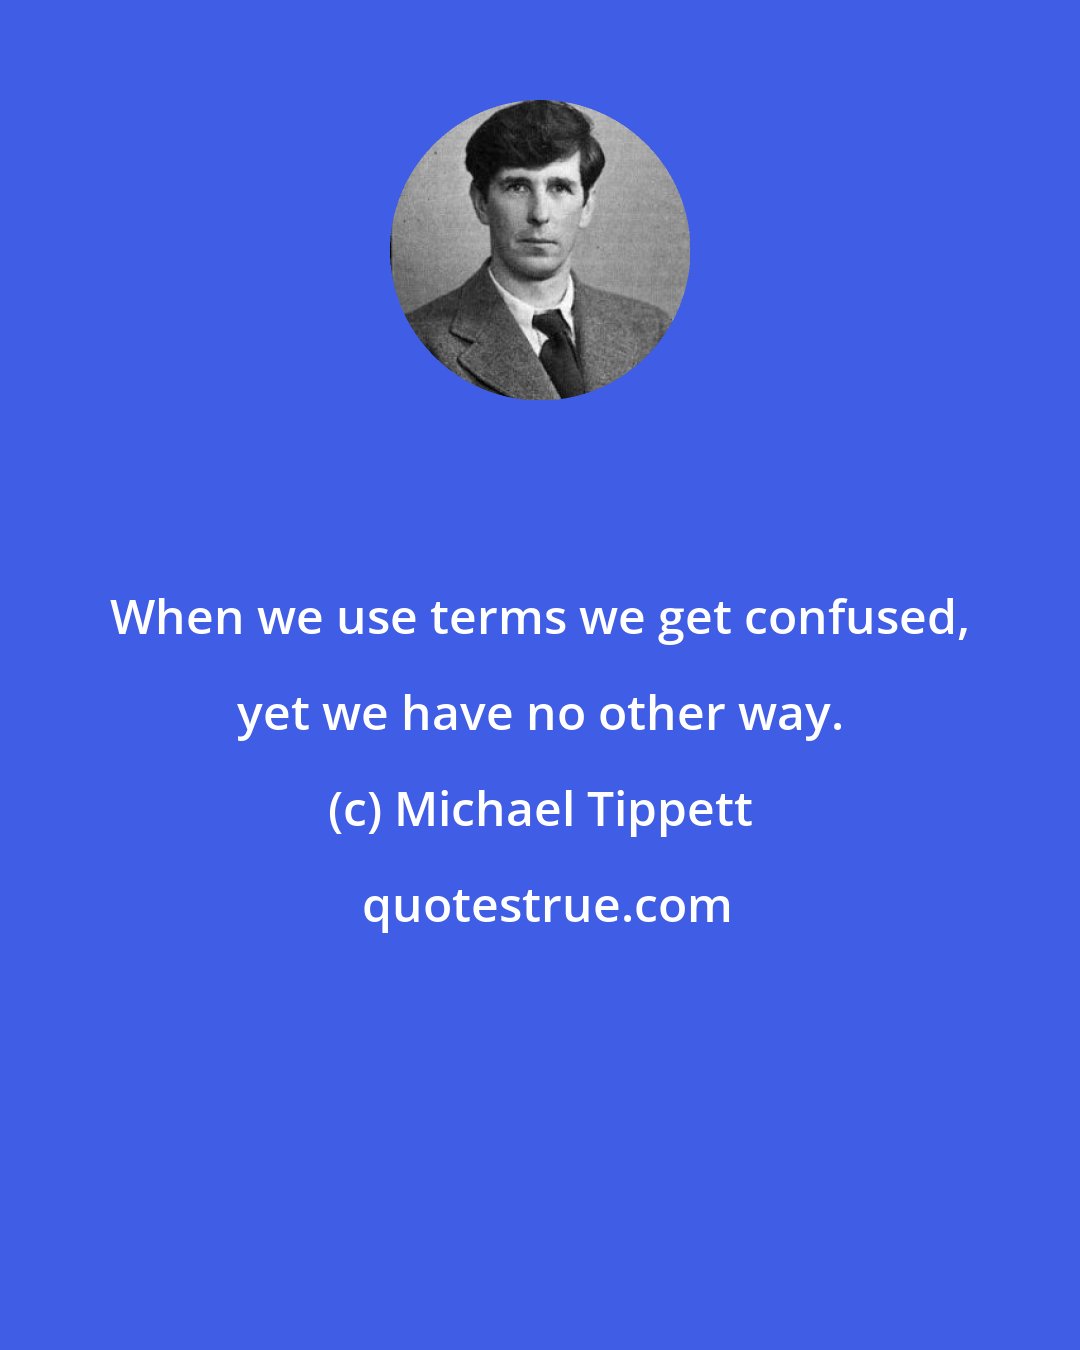 Michael Tippett: When we use terms we get confused, yet we have no other way.